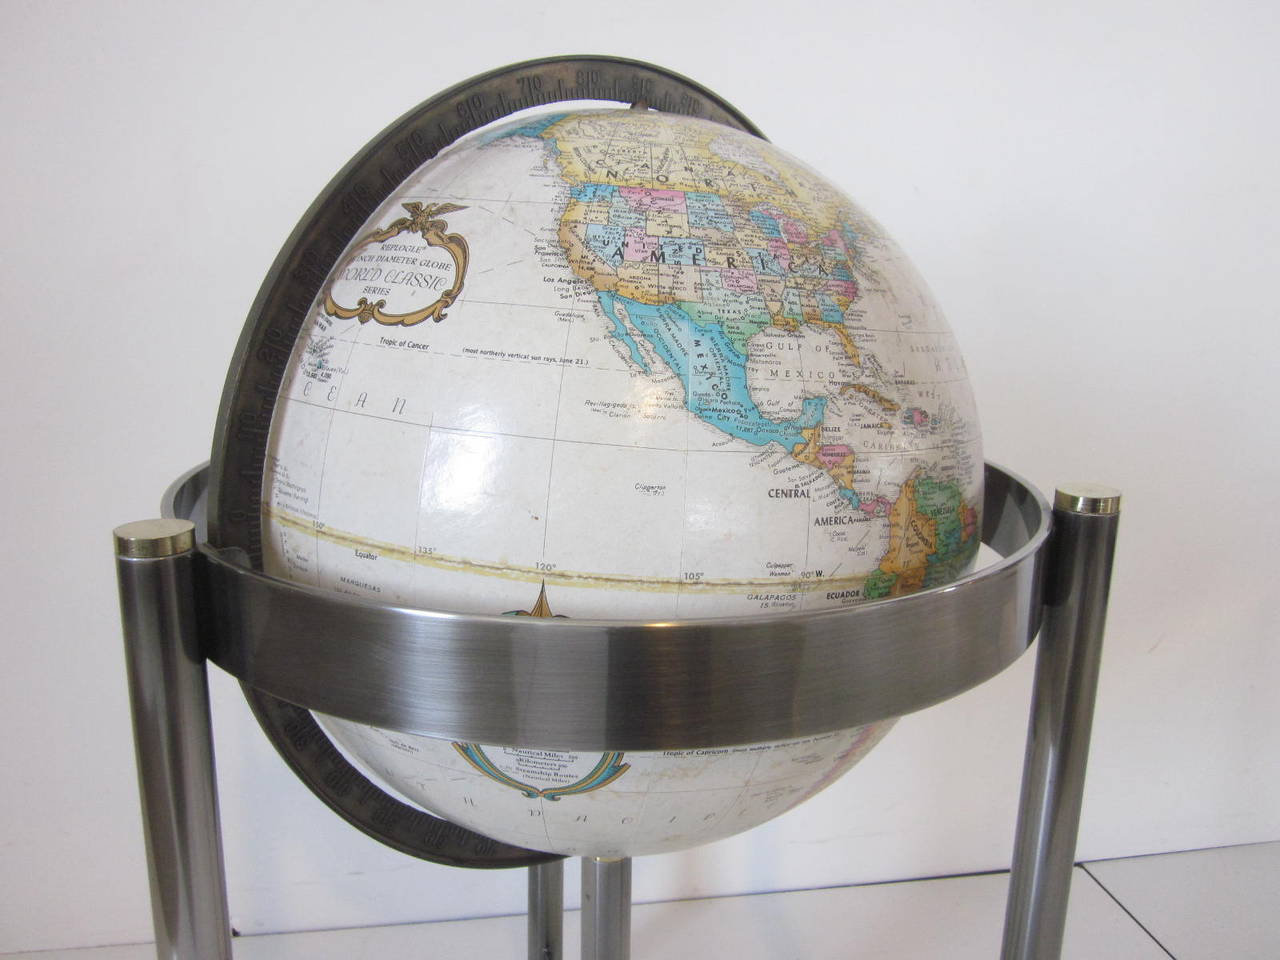 A brushed satin stainless steel floor globe with brass accented pieces and lighter colored globe giving this a sophisticated modern and clean design asthenic. Manufactured by the Replogle company.